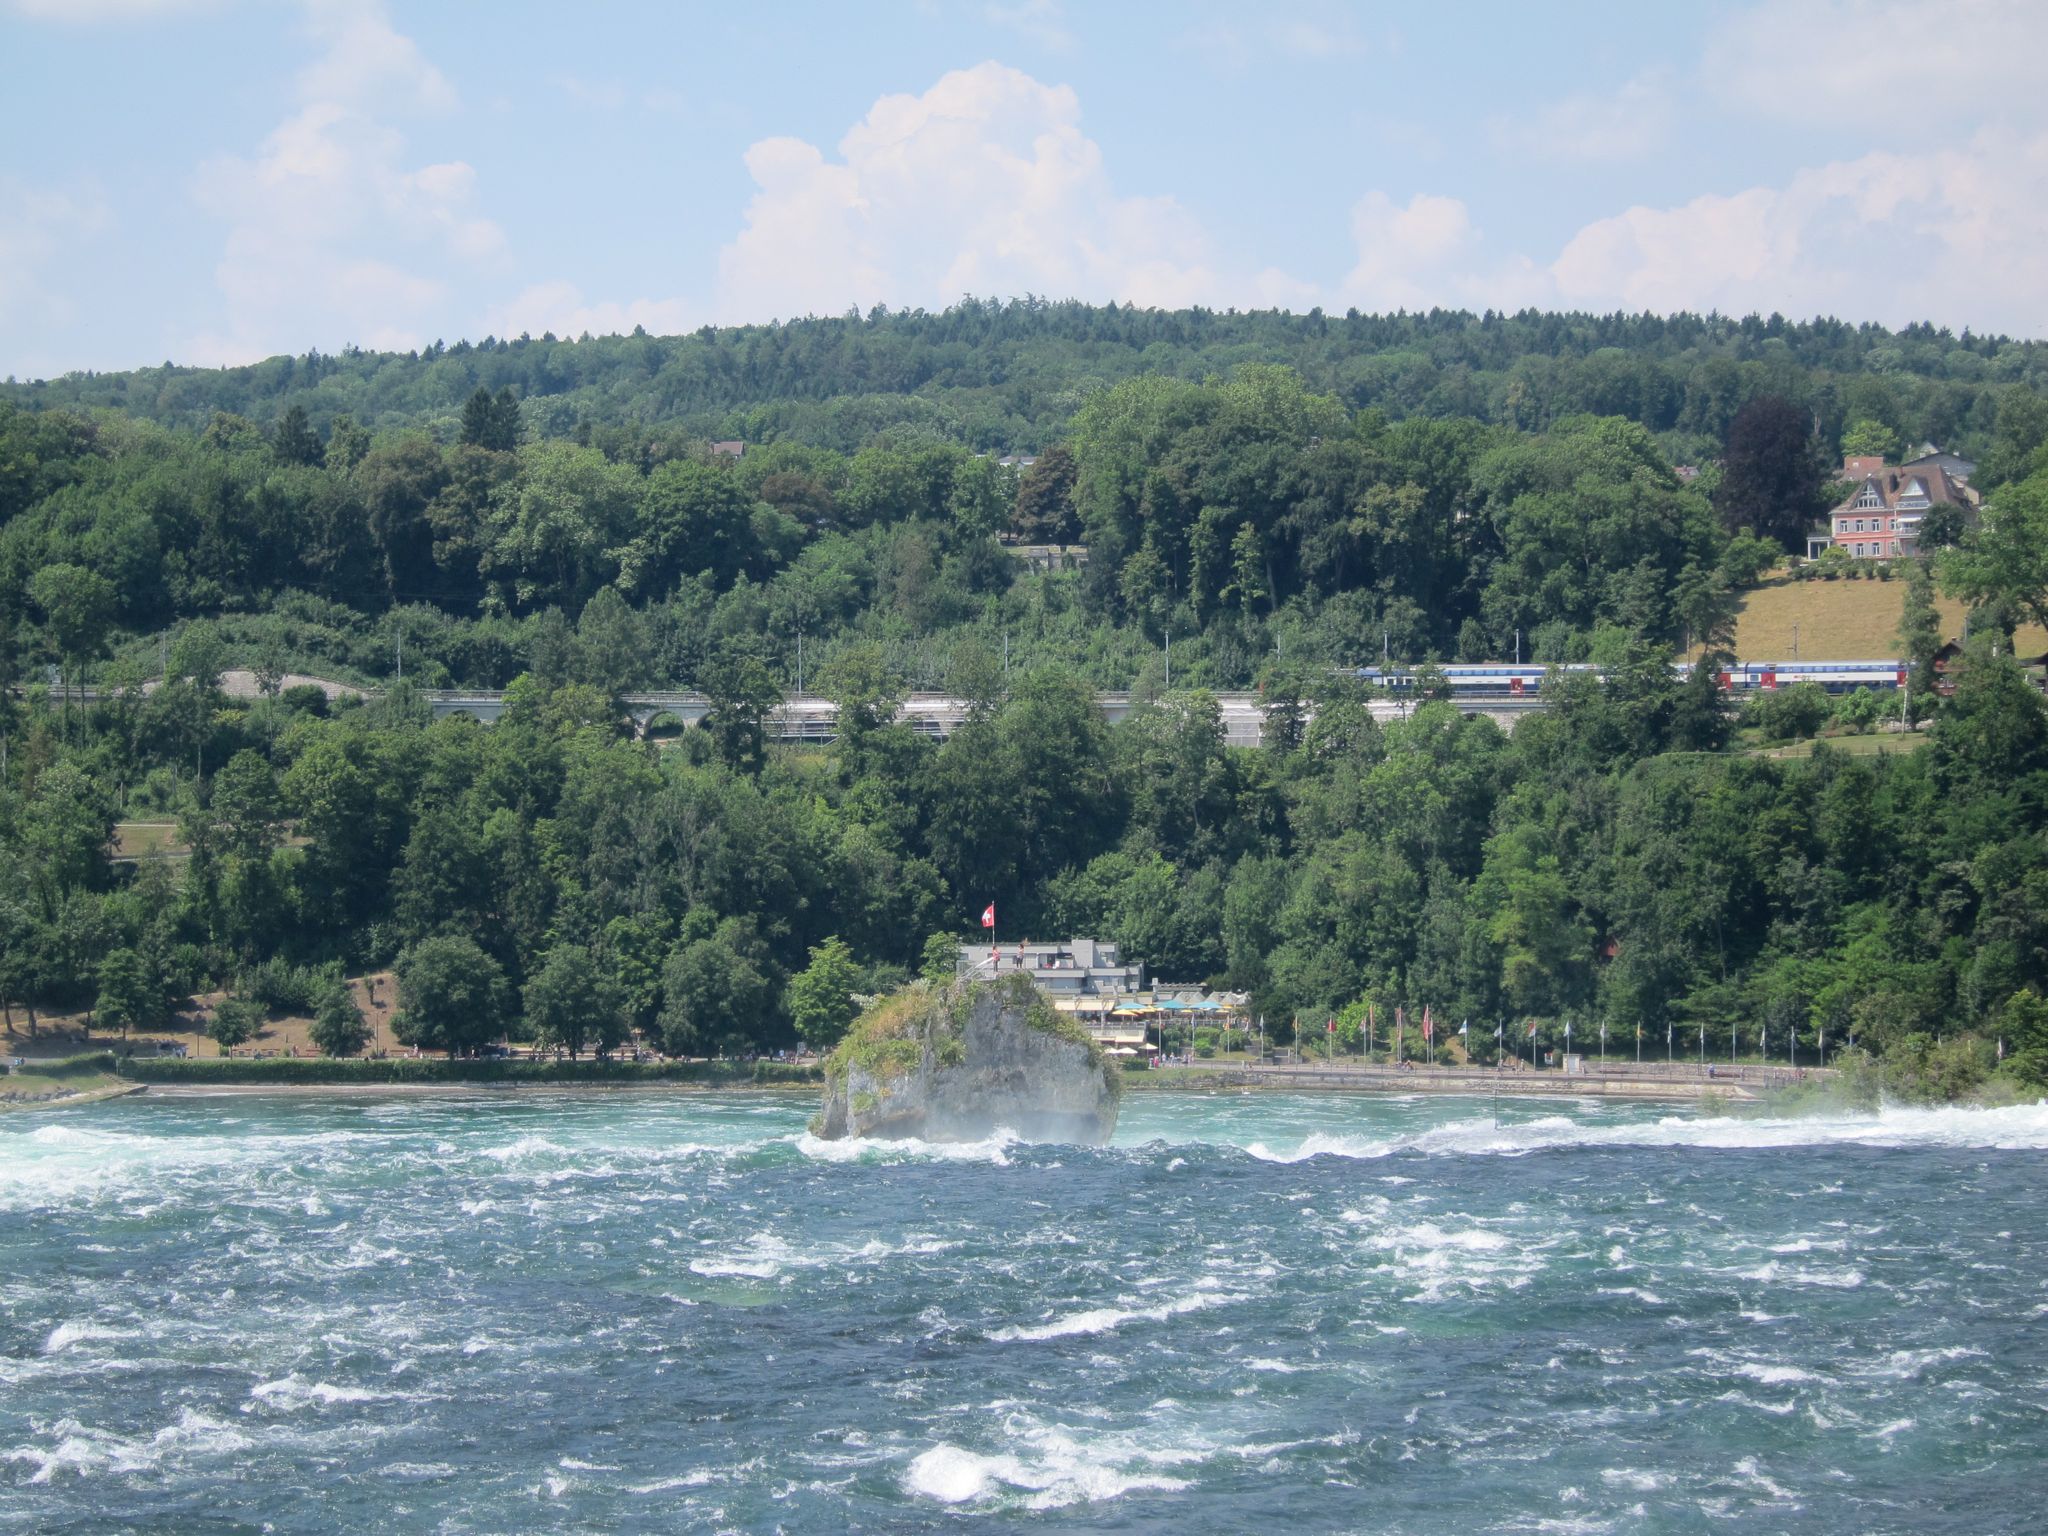 Photo 17 of 22 from the album Rheinfall.